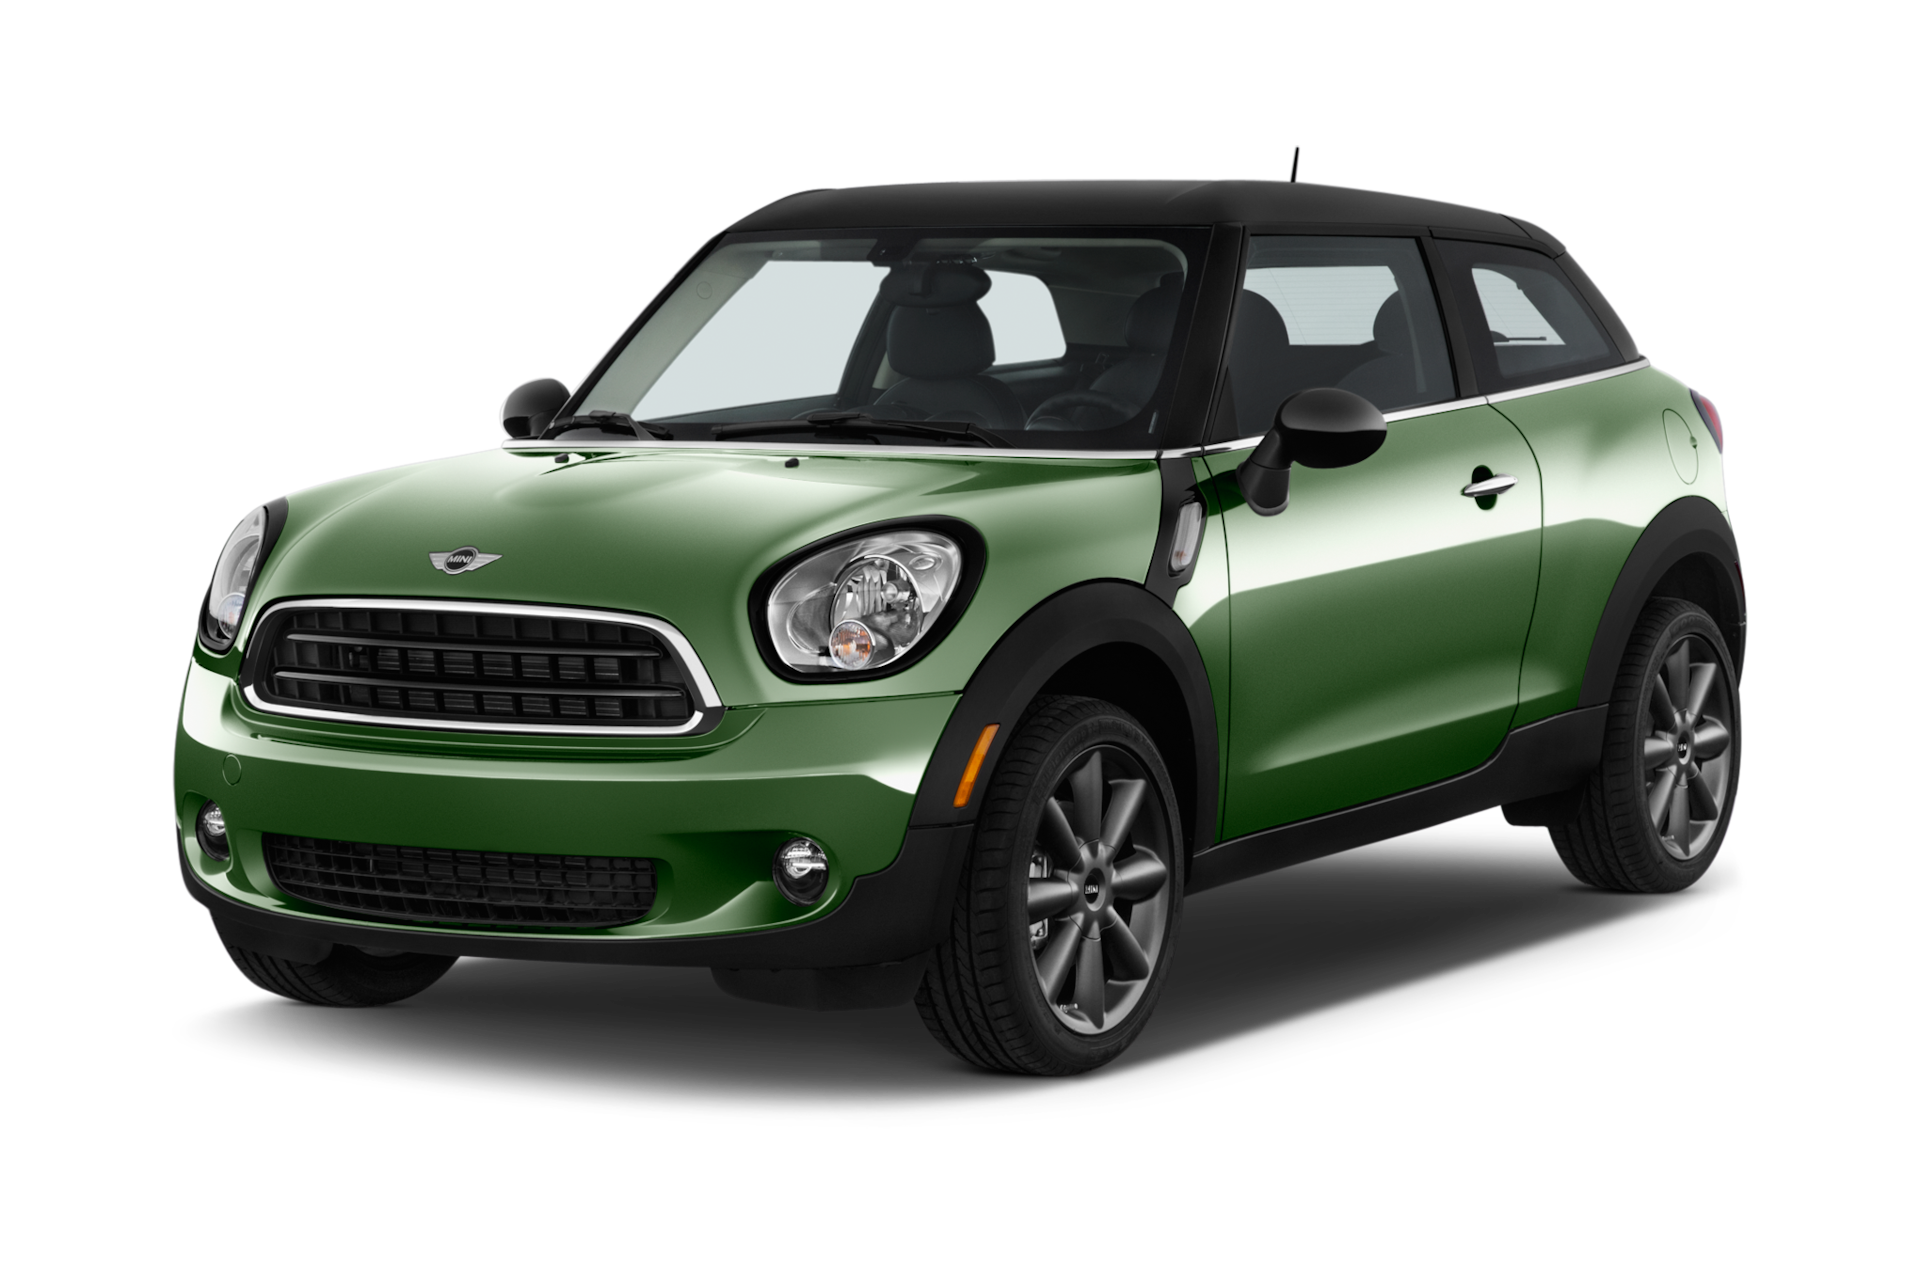 2015 MINI Cooper Paceman Prices, Reviews, and Photos - MotorTrend